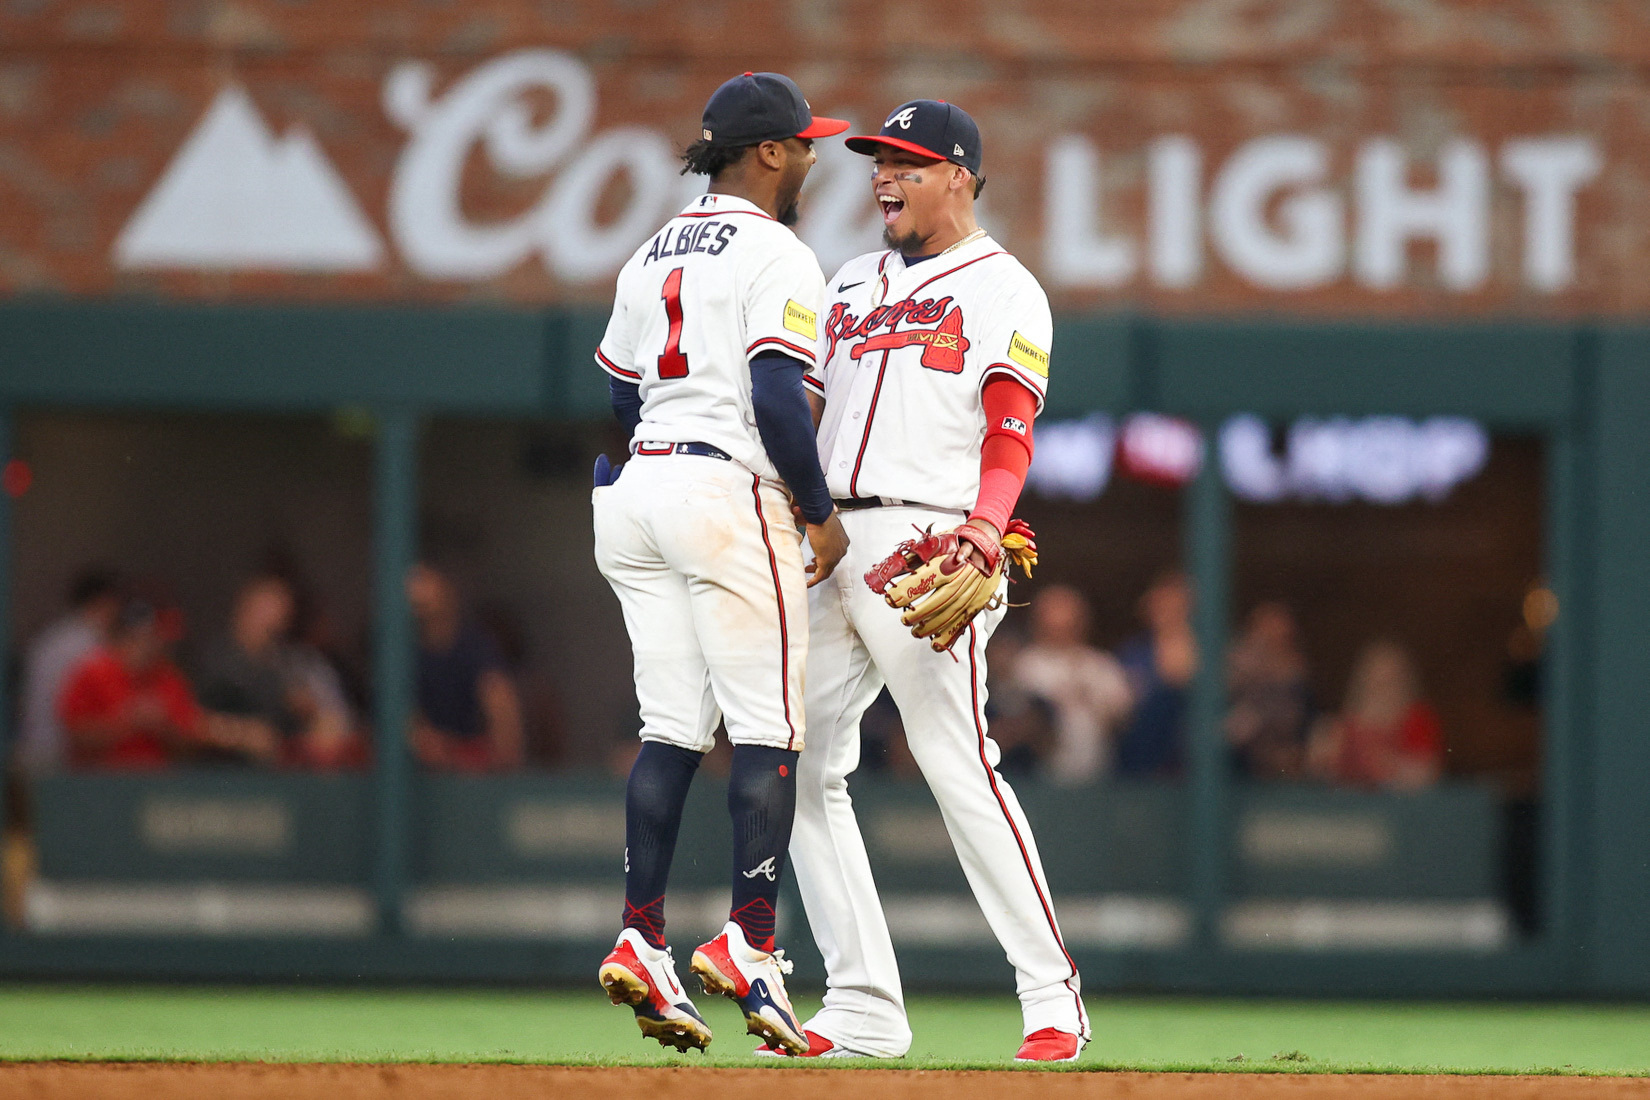 The Twins picked off Ronald Acuña Jr. A glimpse at his blistering